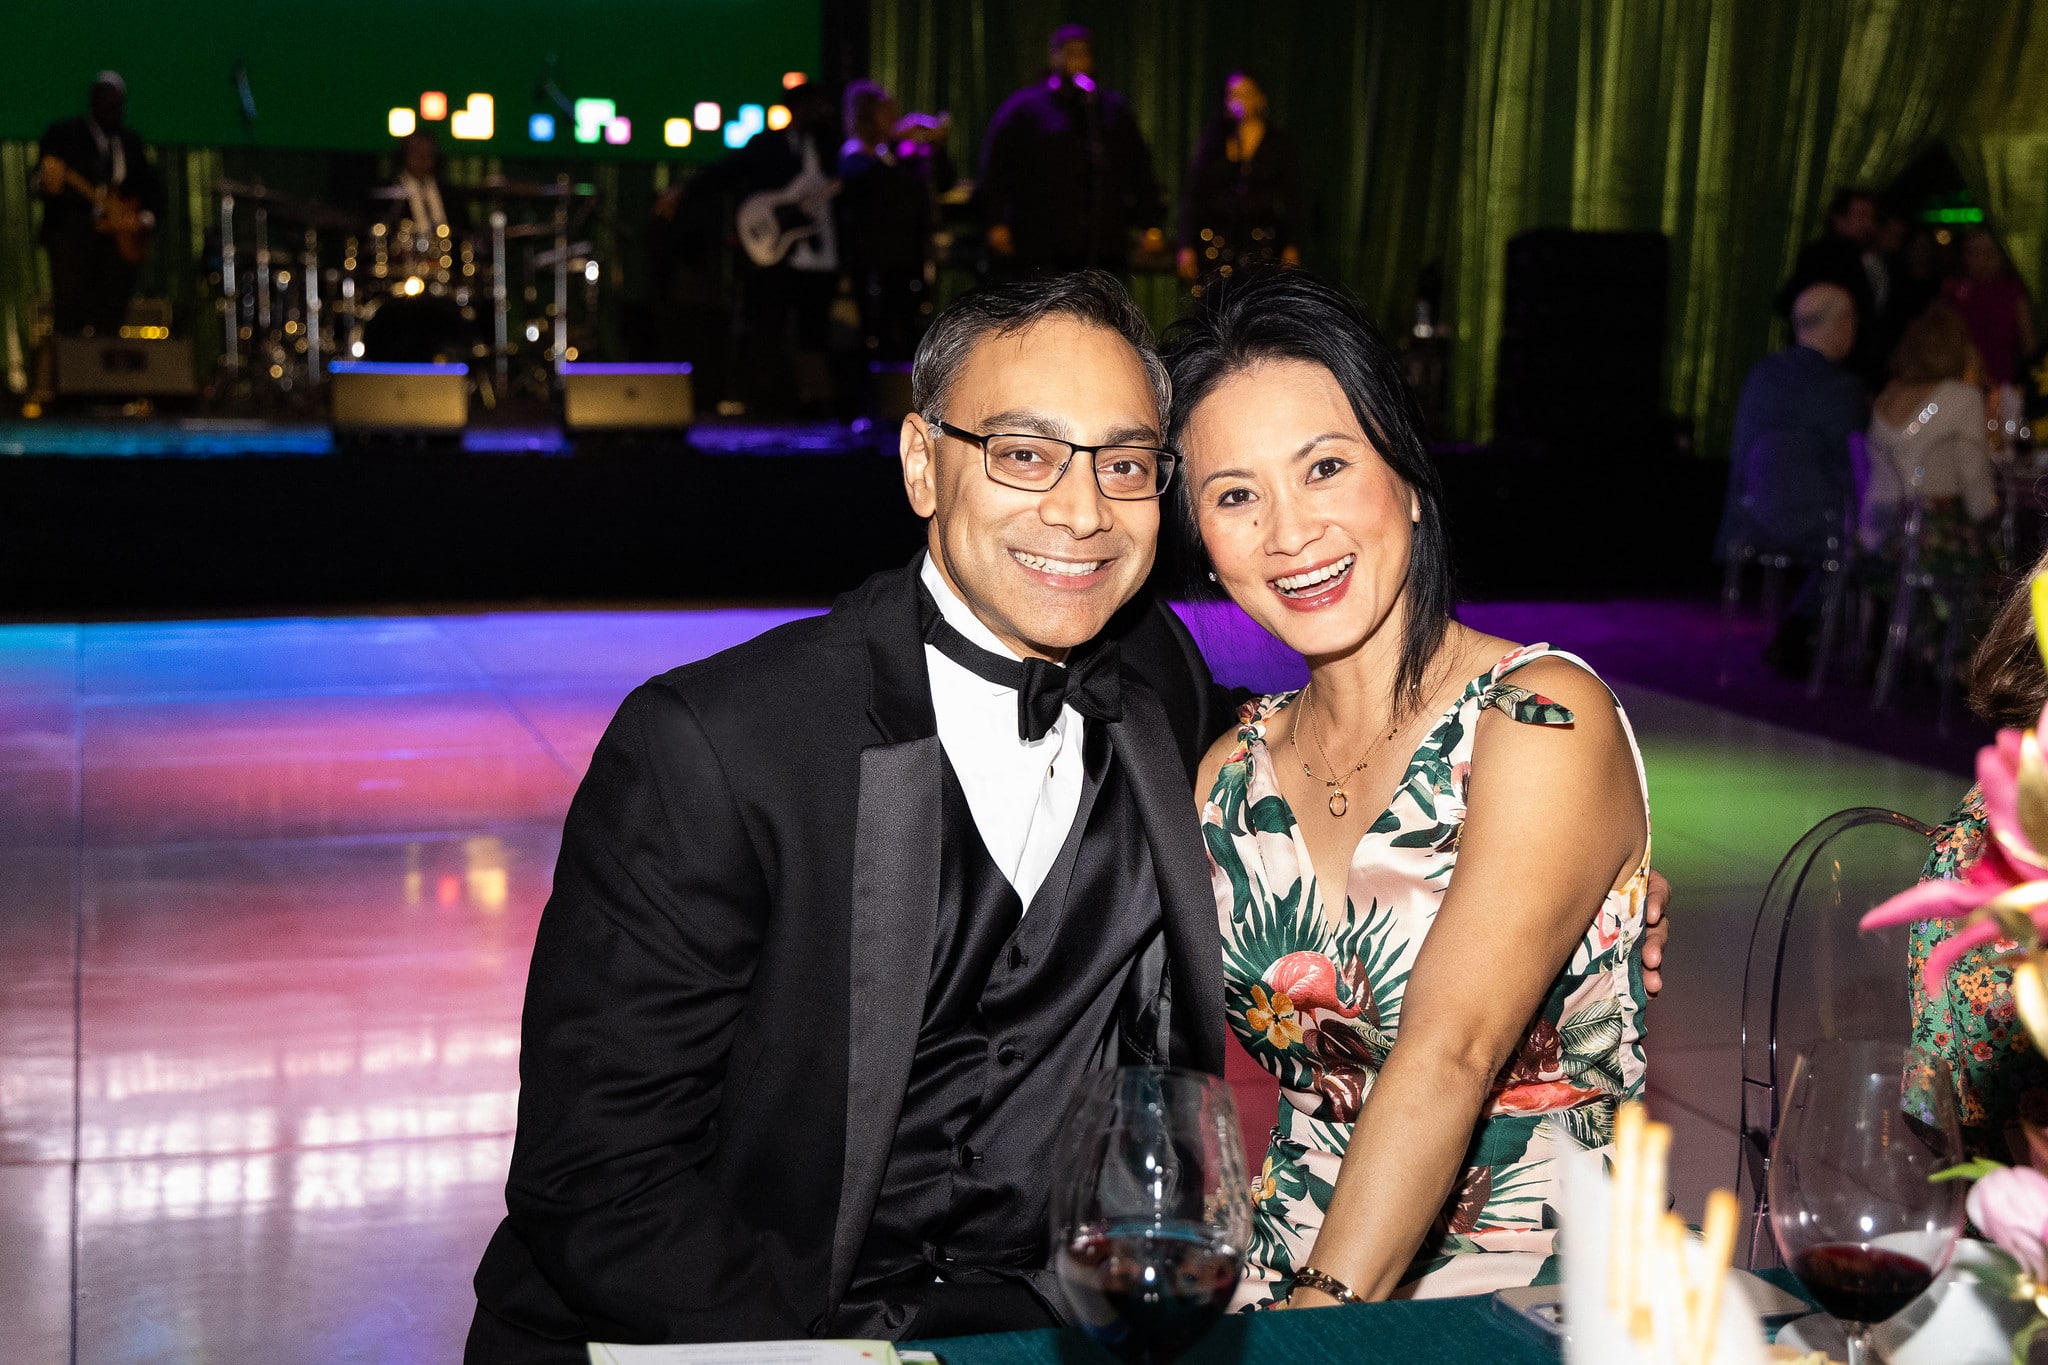 From L-R: Salil Deshpande, Esther Puig  Gala on the Green® at Discovery Green in downtown Houston. February 23, 2023. Photo: Lawrence Elizabeth Knox